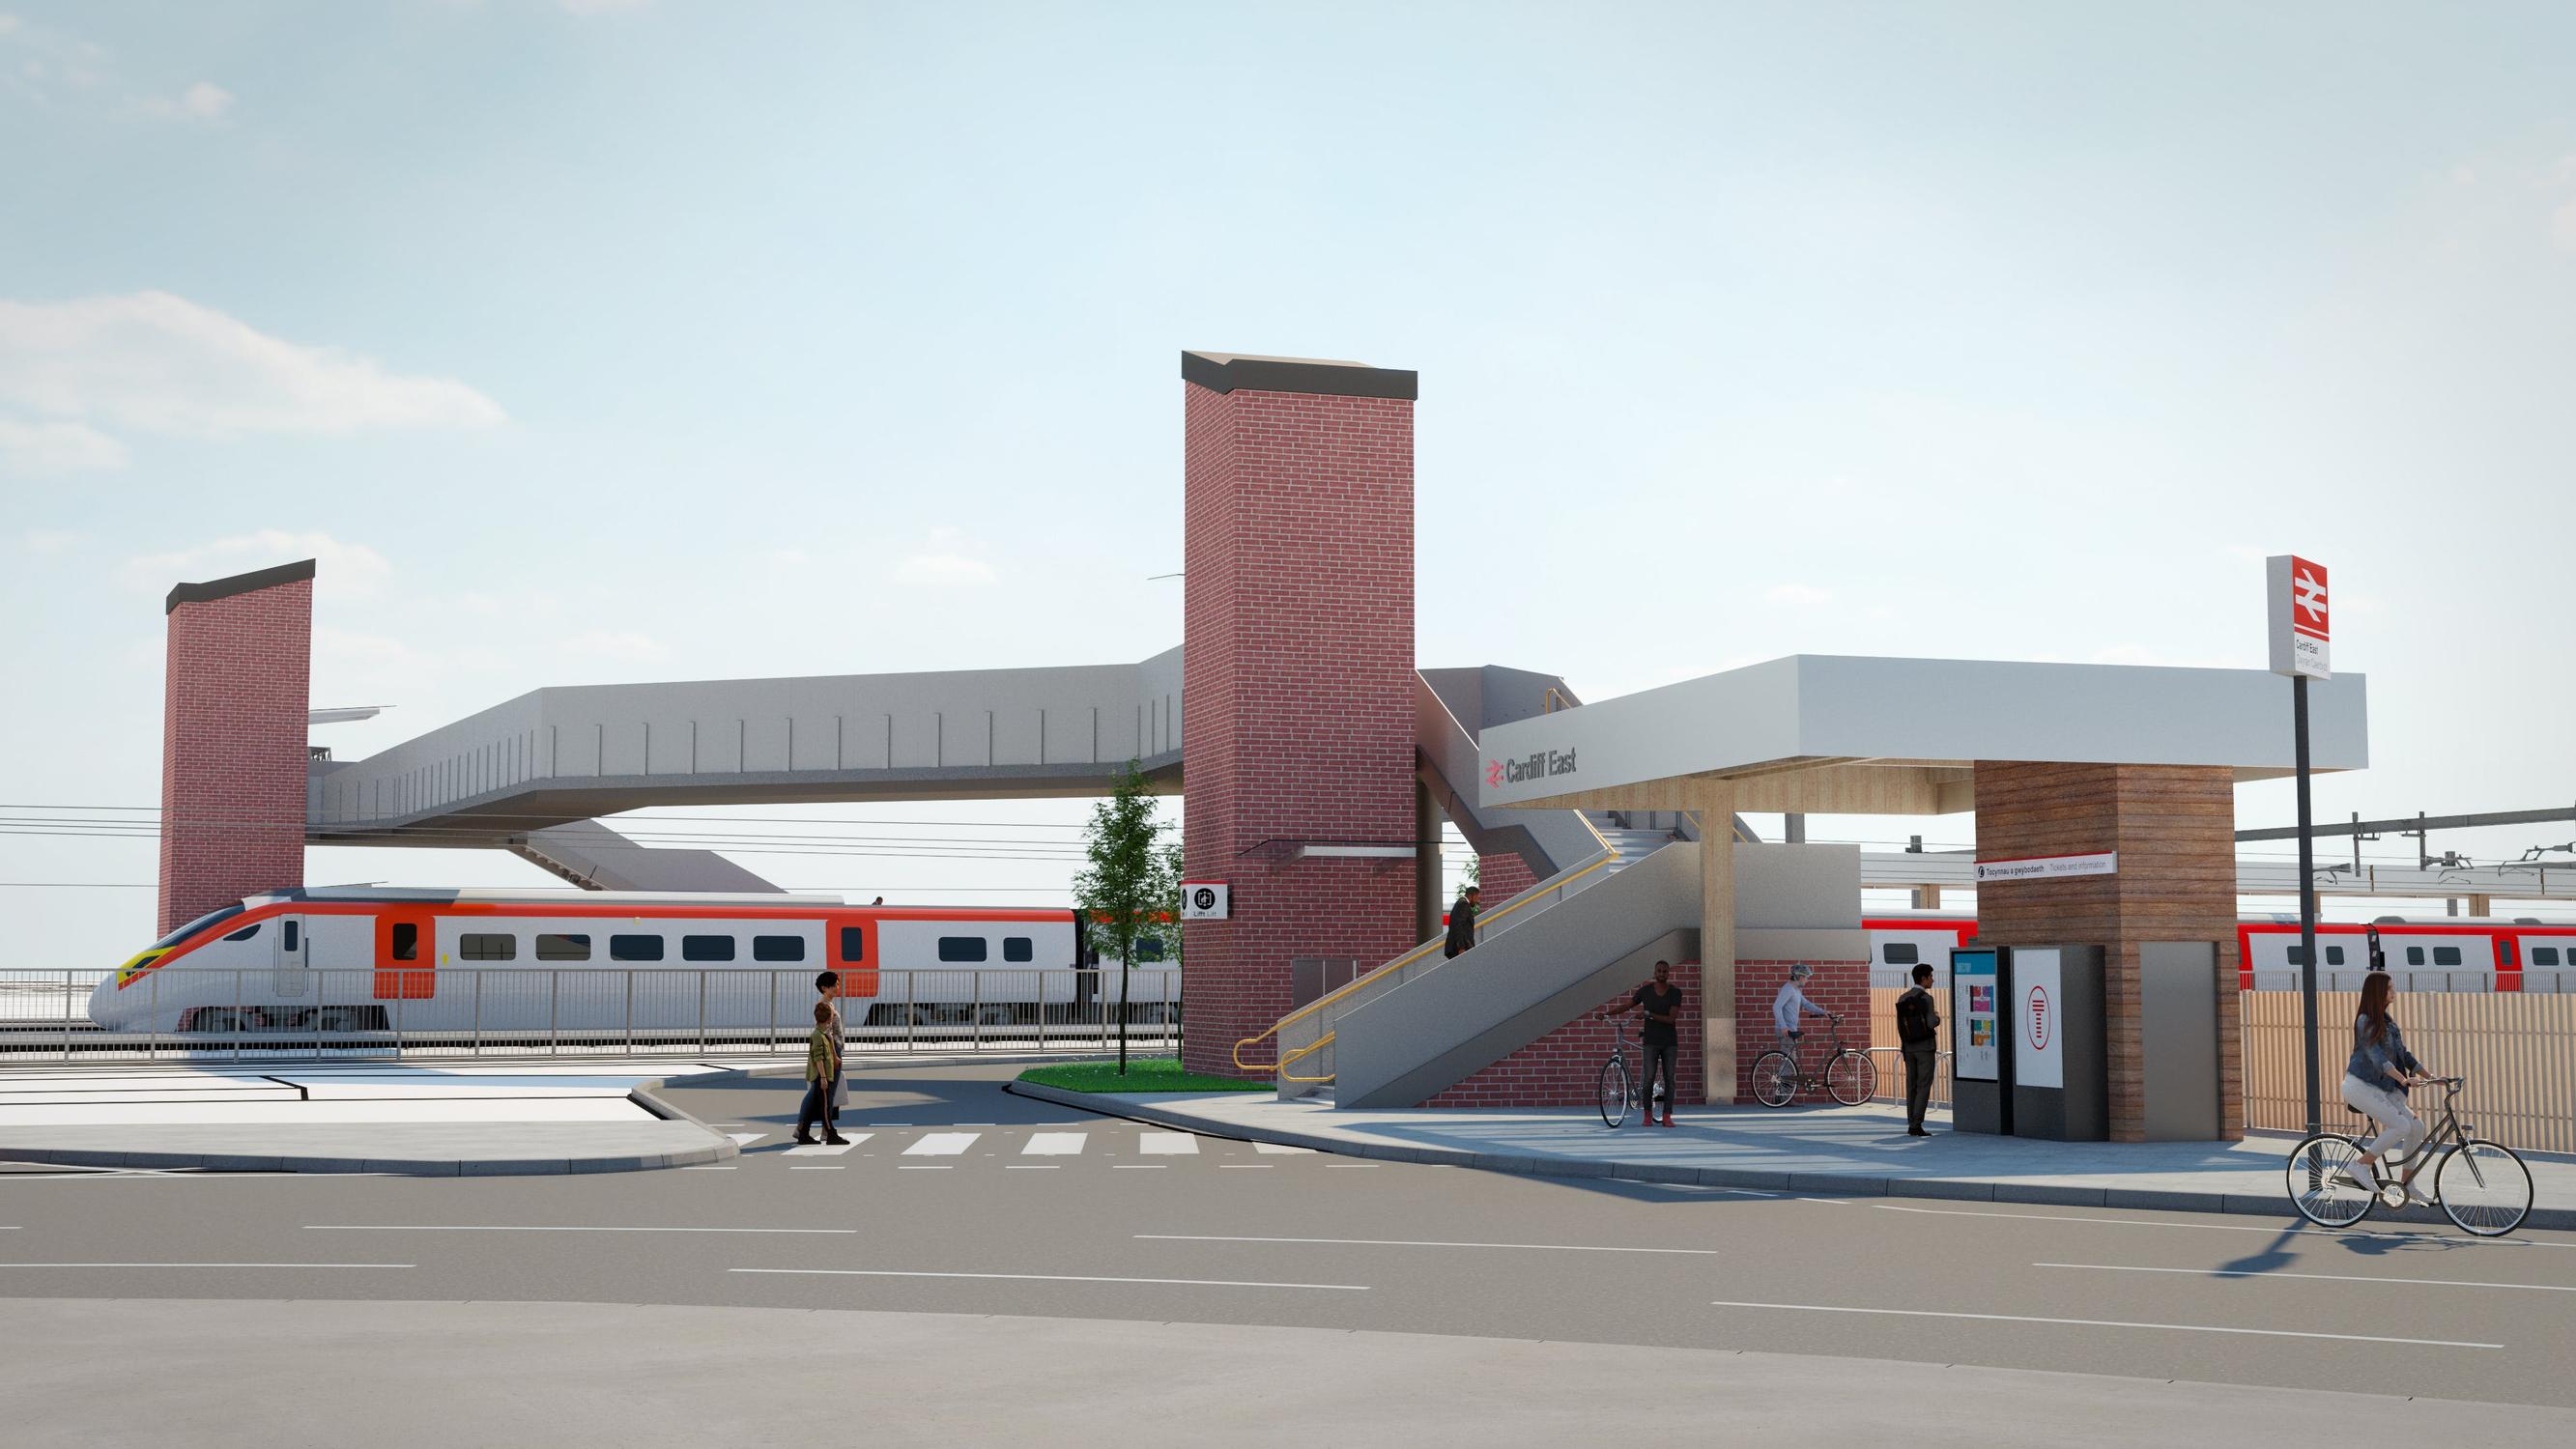 Design for the Cardiff East station (TfW)